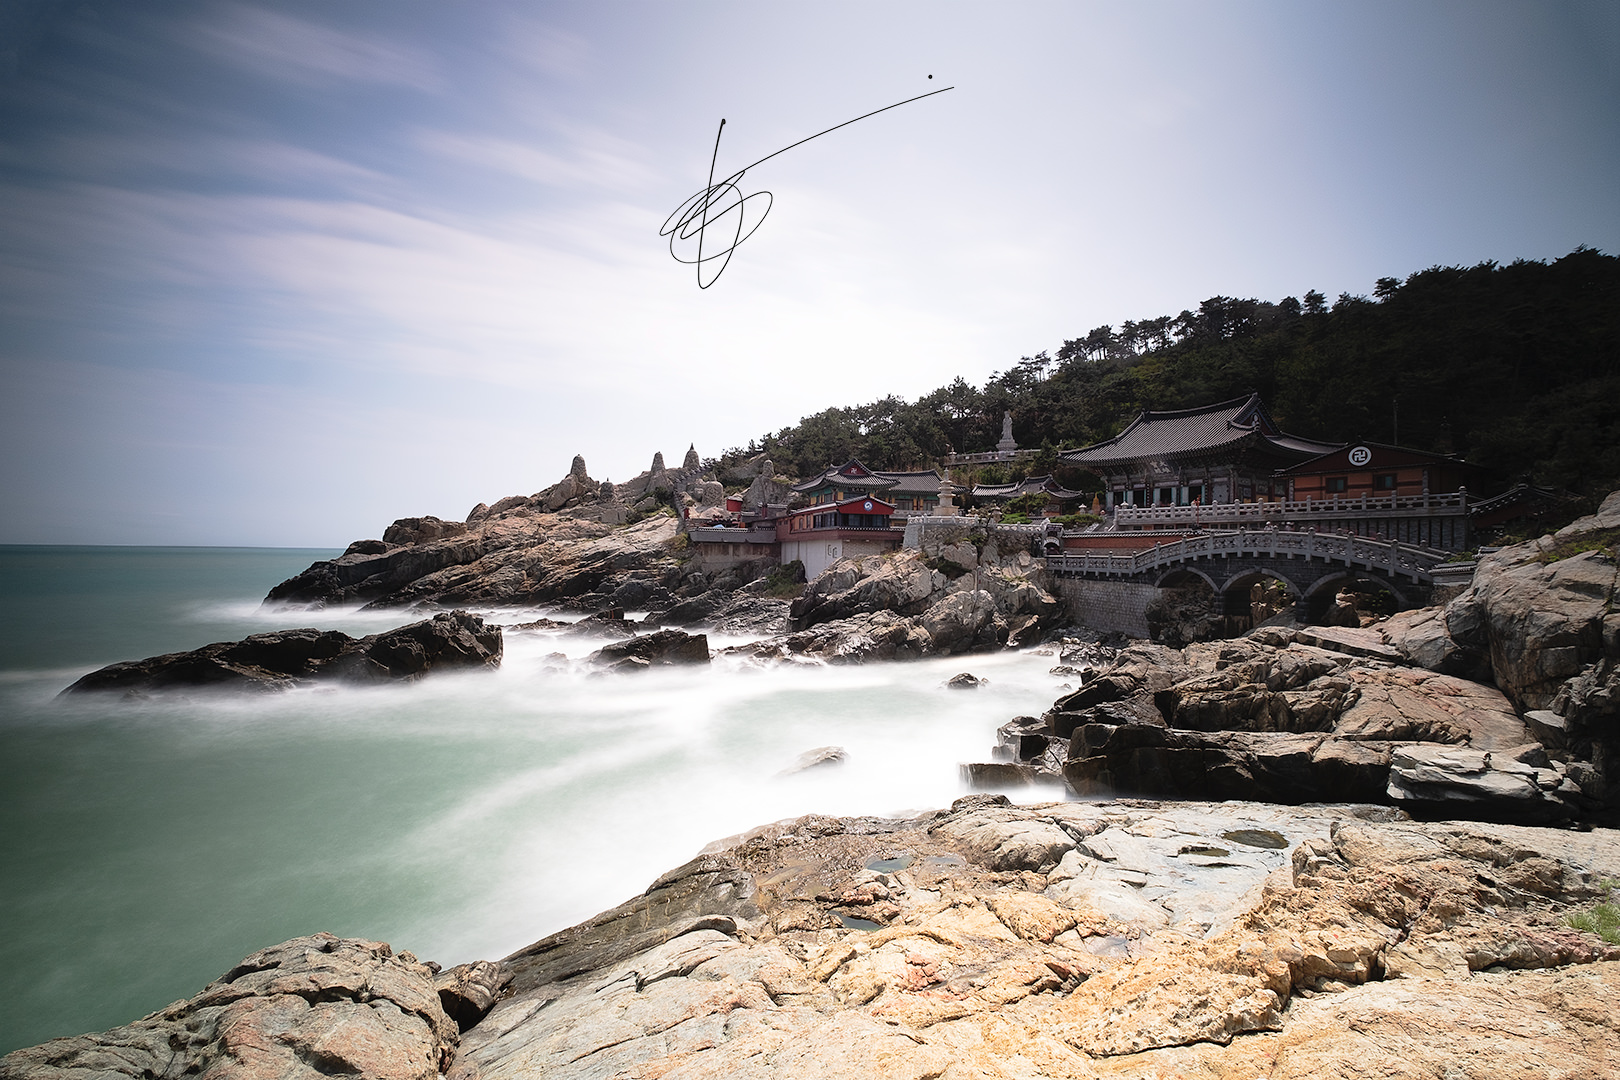 The beautiful Buddhist temple on the shore of Busan